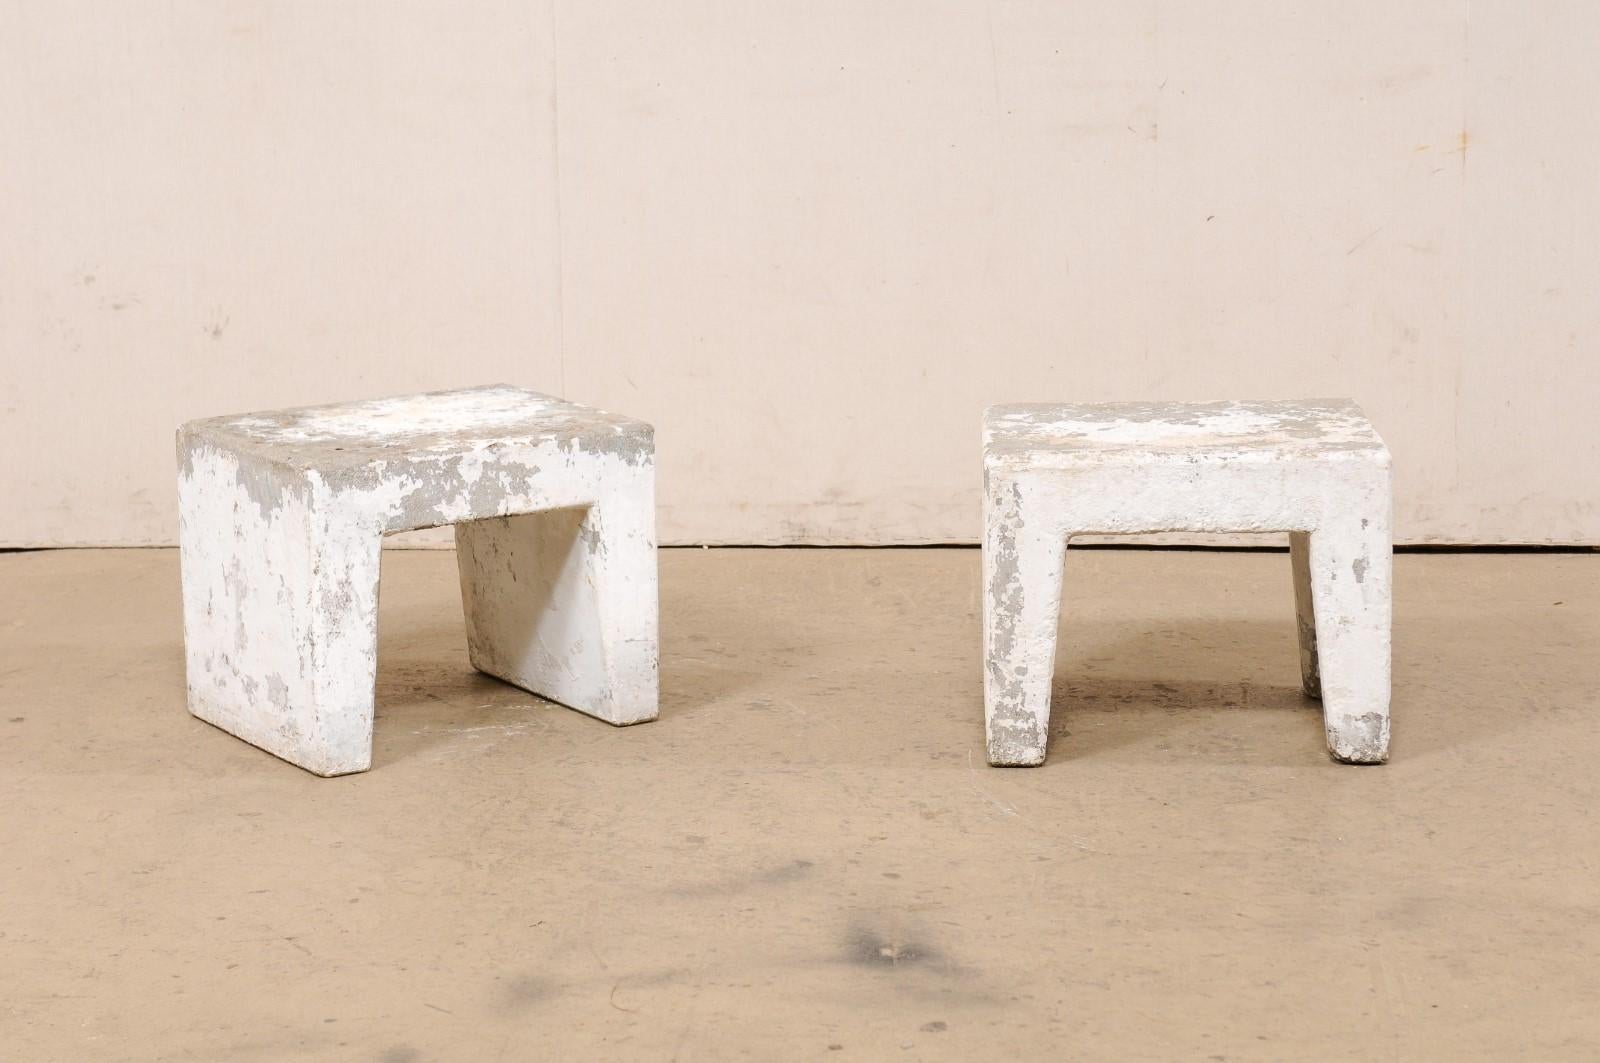 A Spanish pair of small concrete table stands from the Mid-20th Century. These midcentury concrete risers from Spain have been designed in clean/modern lines, with flat rectangular-shaped tops, and each raised on a pair of legs which give the tables